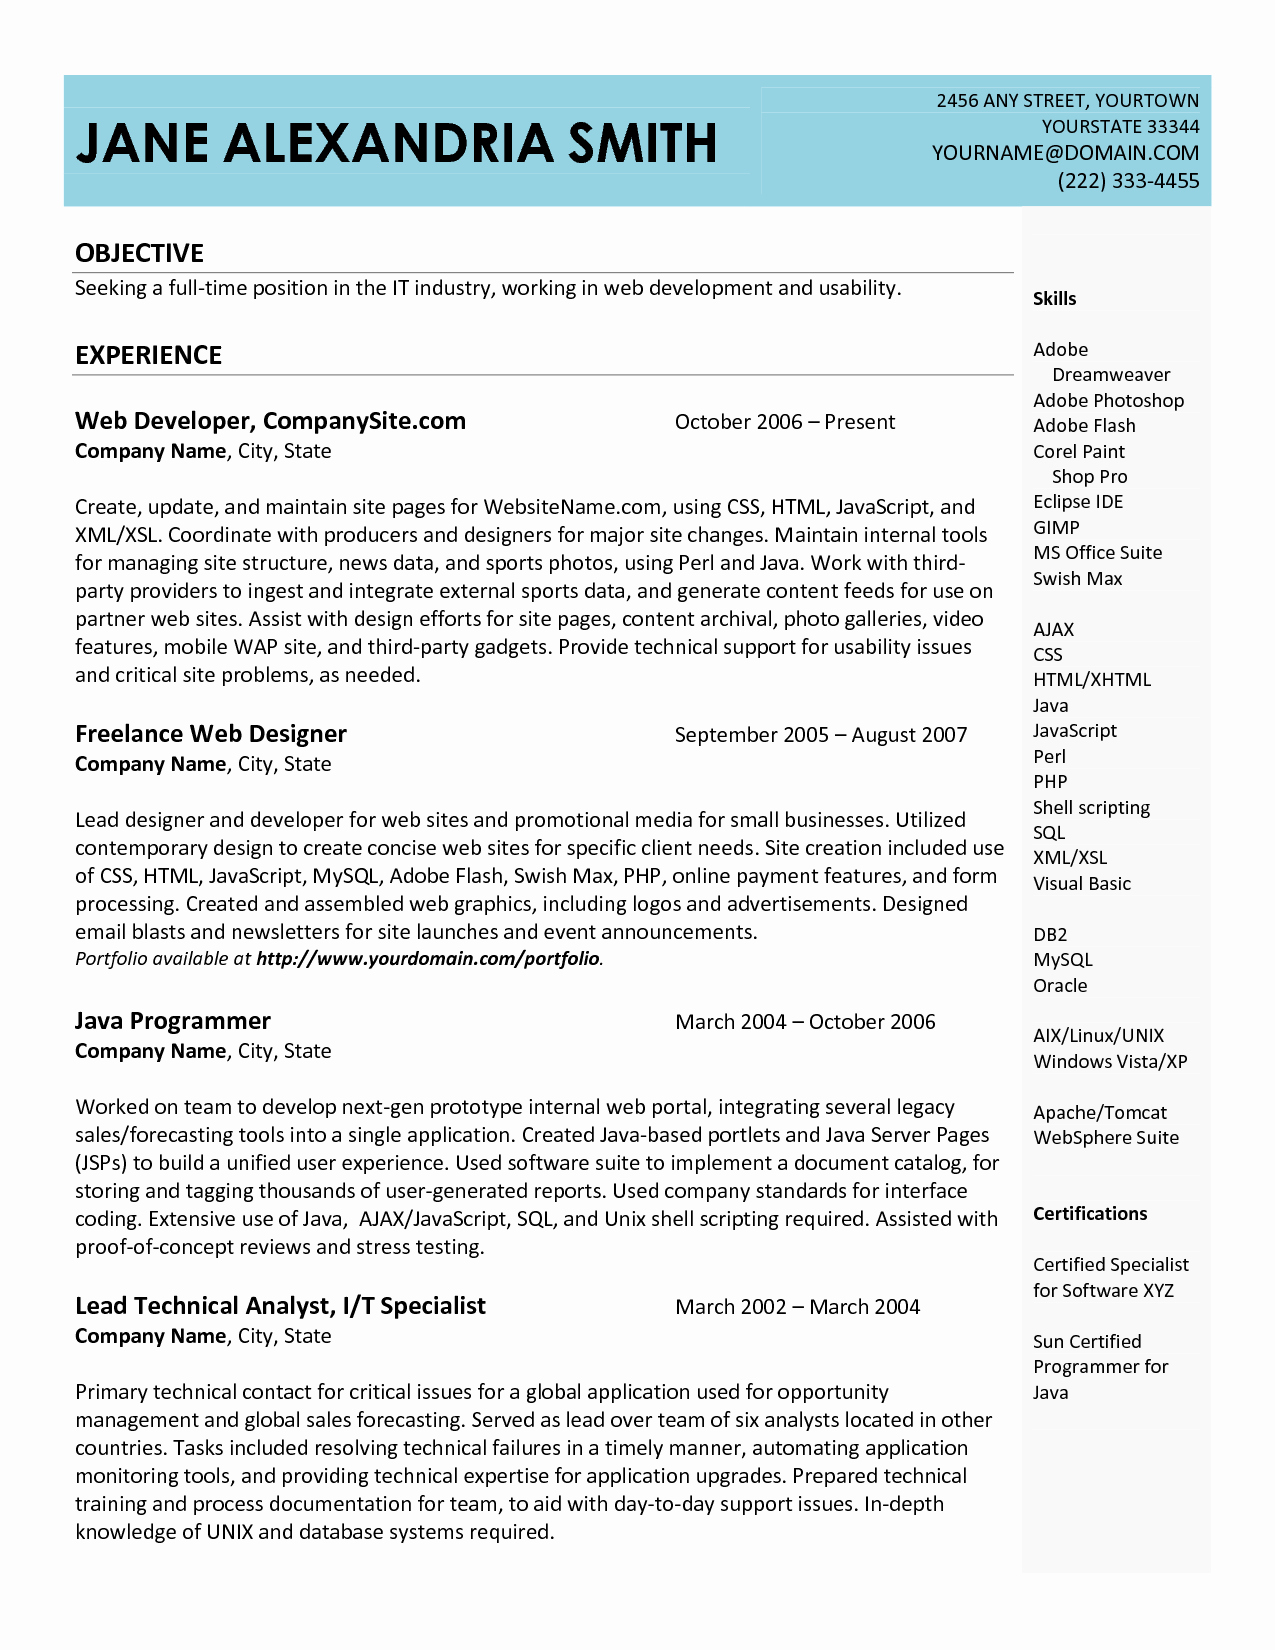 Your Guide to the Best Free Resume Templates